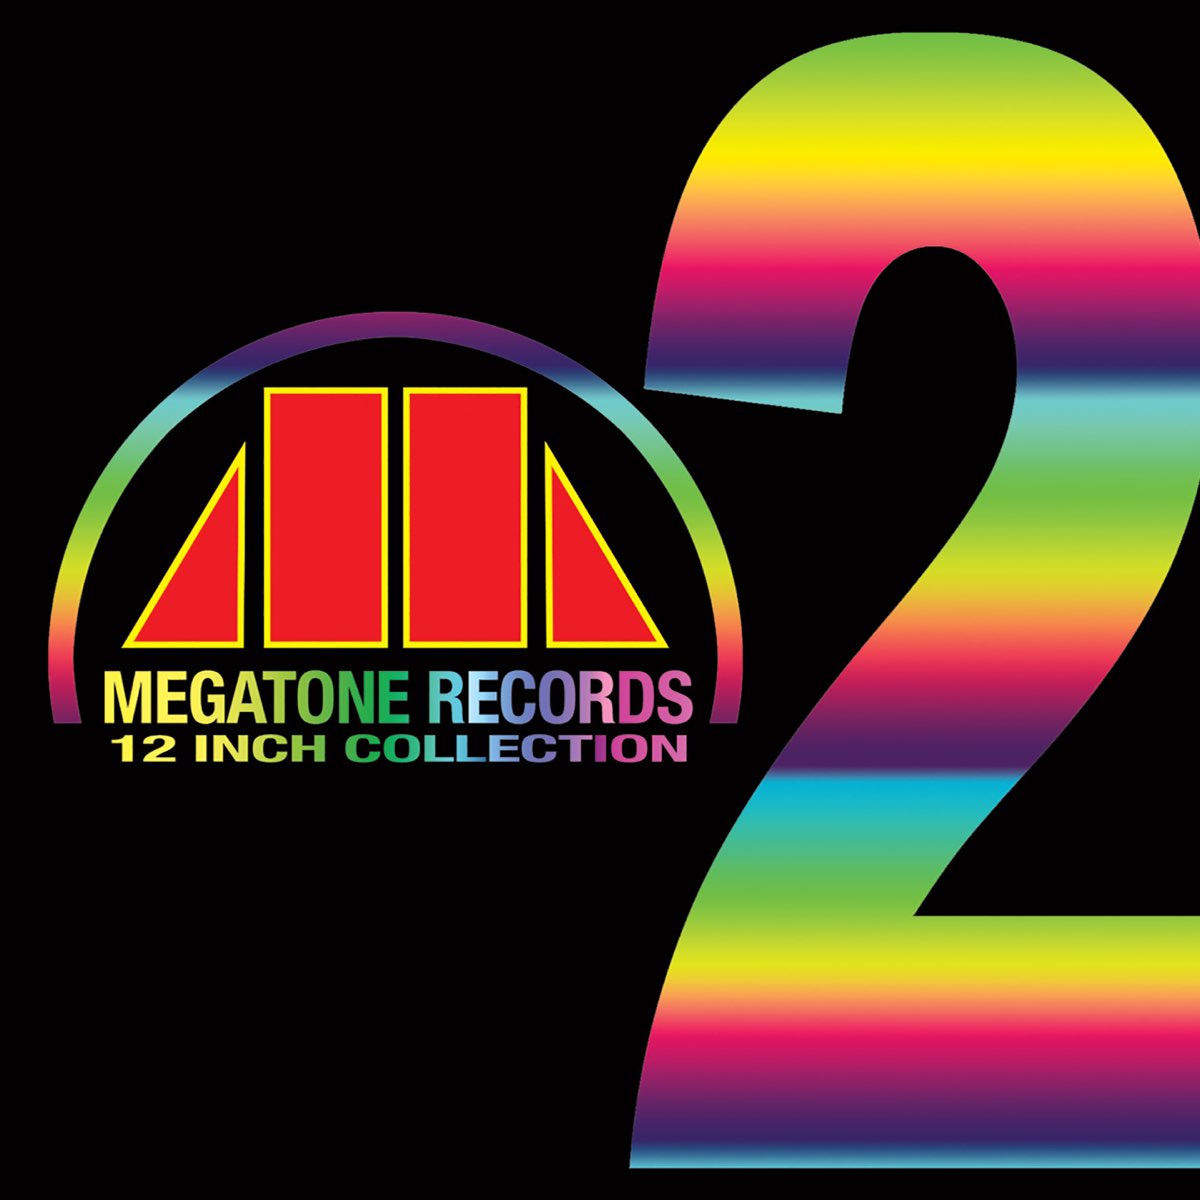 ‎Megatone Records: 12 Inch Collection, Vol. 2 by Various Artists on ...